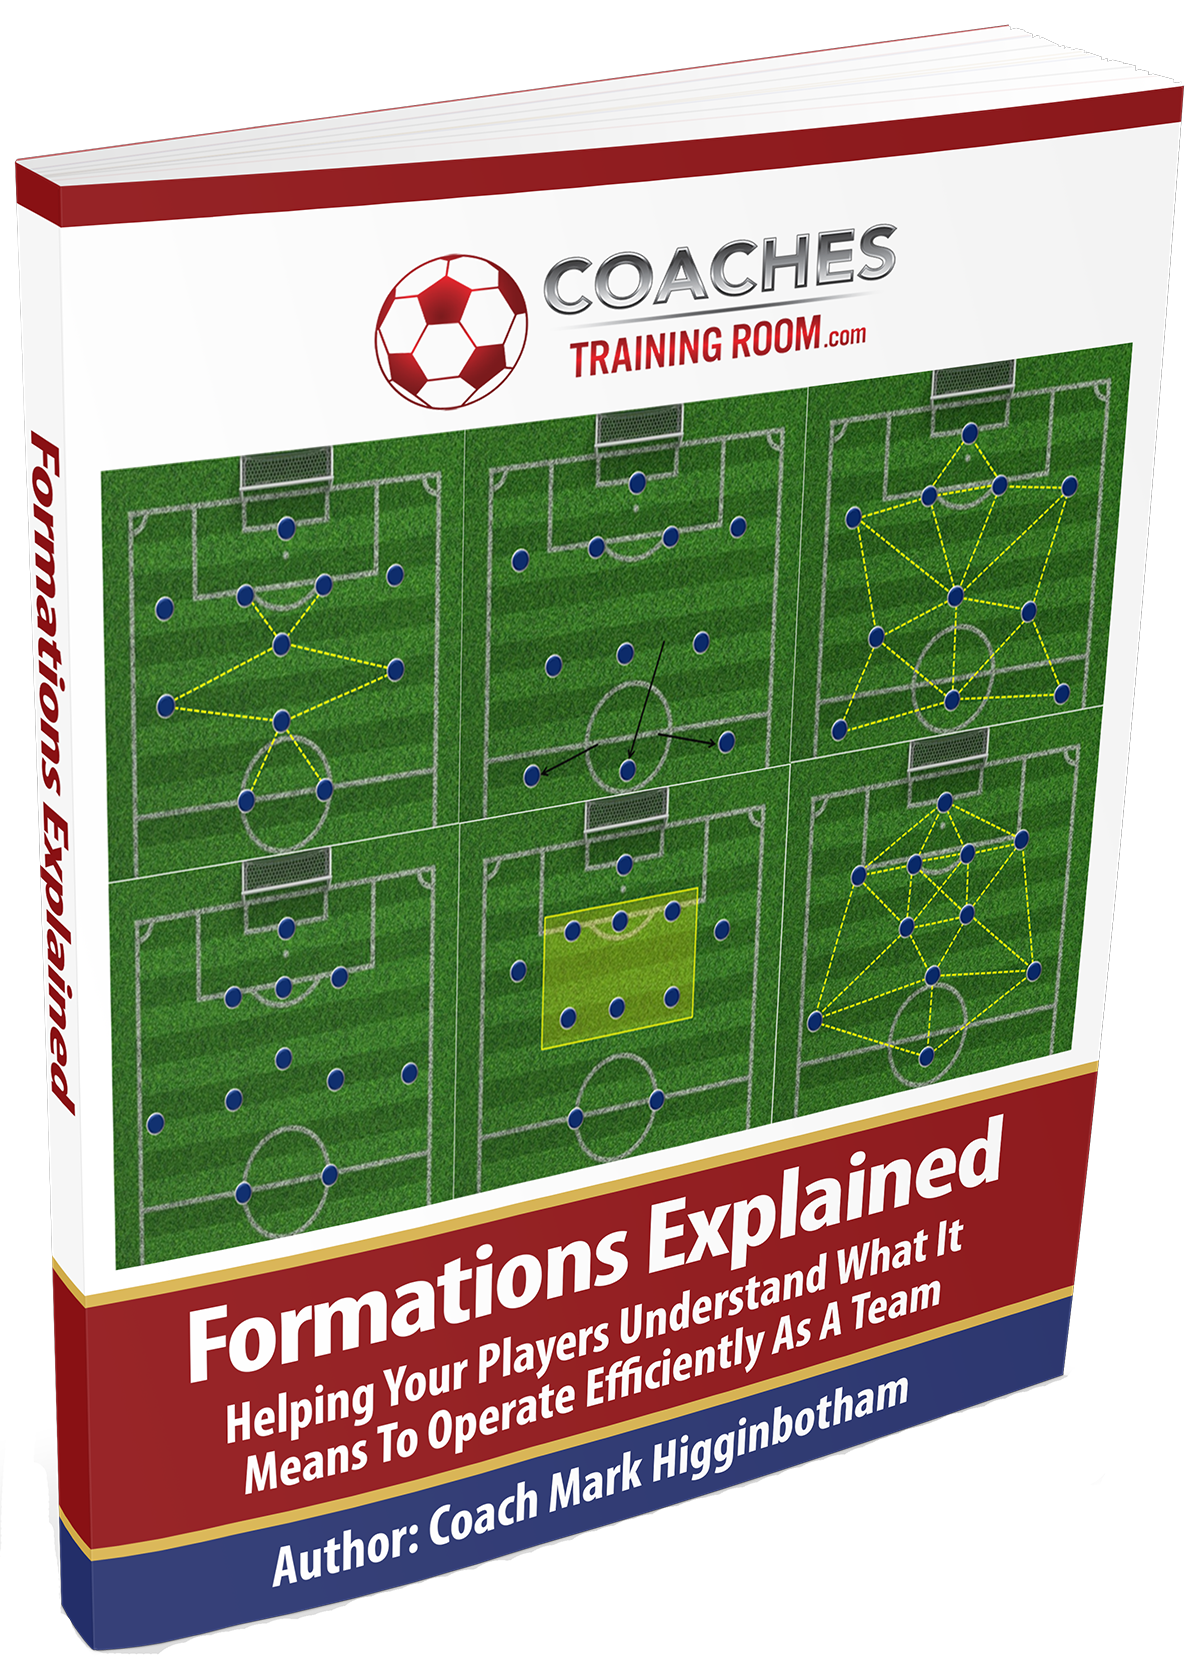 Formations Explained - Helping your players understand what it means to operate efficiently as a team by Mark Higginbotham - Coaches Training Room